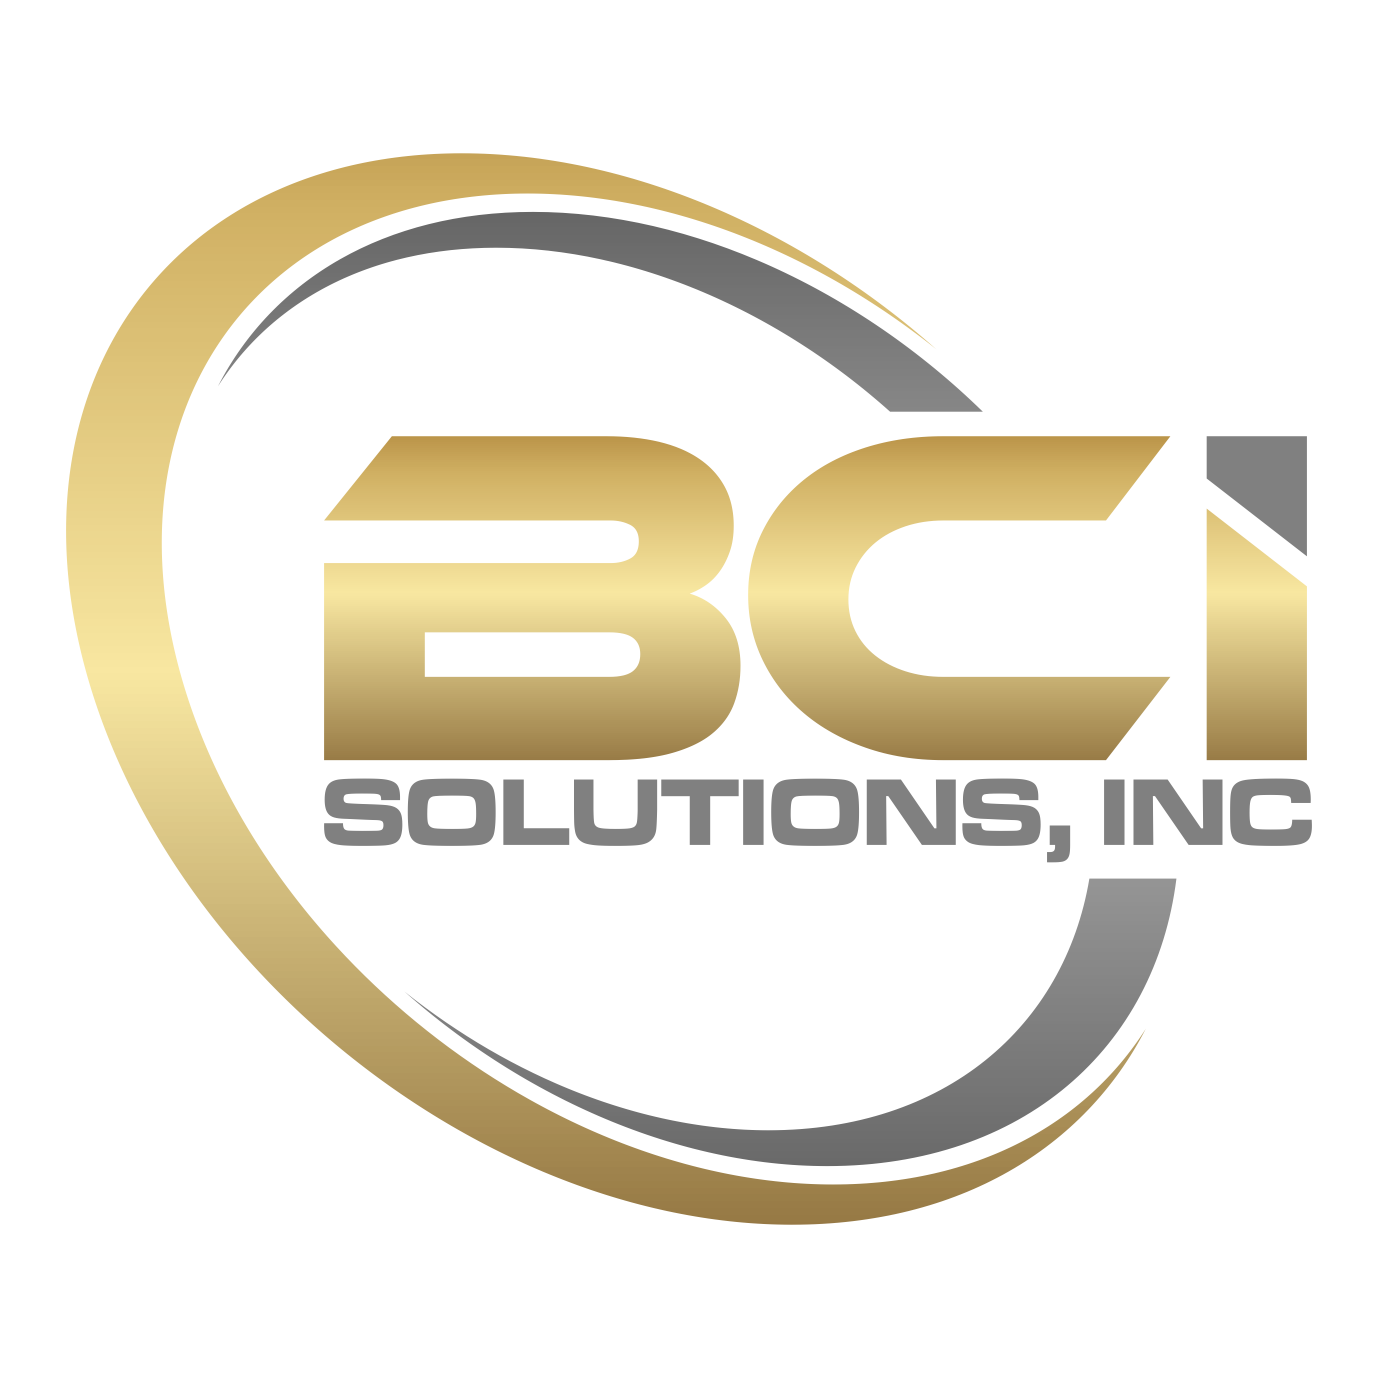 www.bcisolutions.com